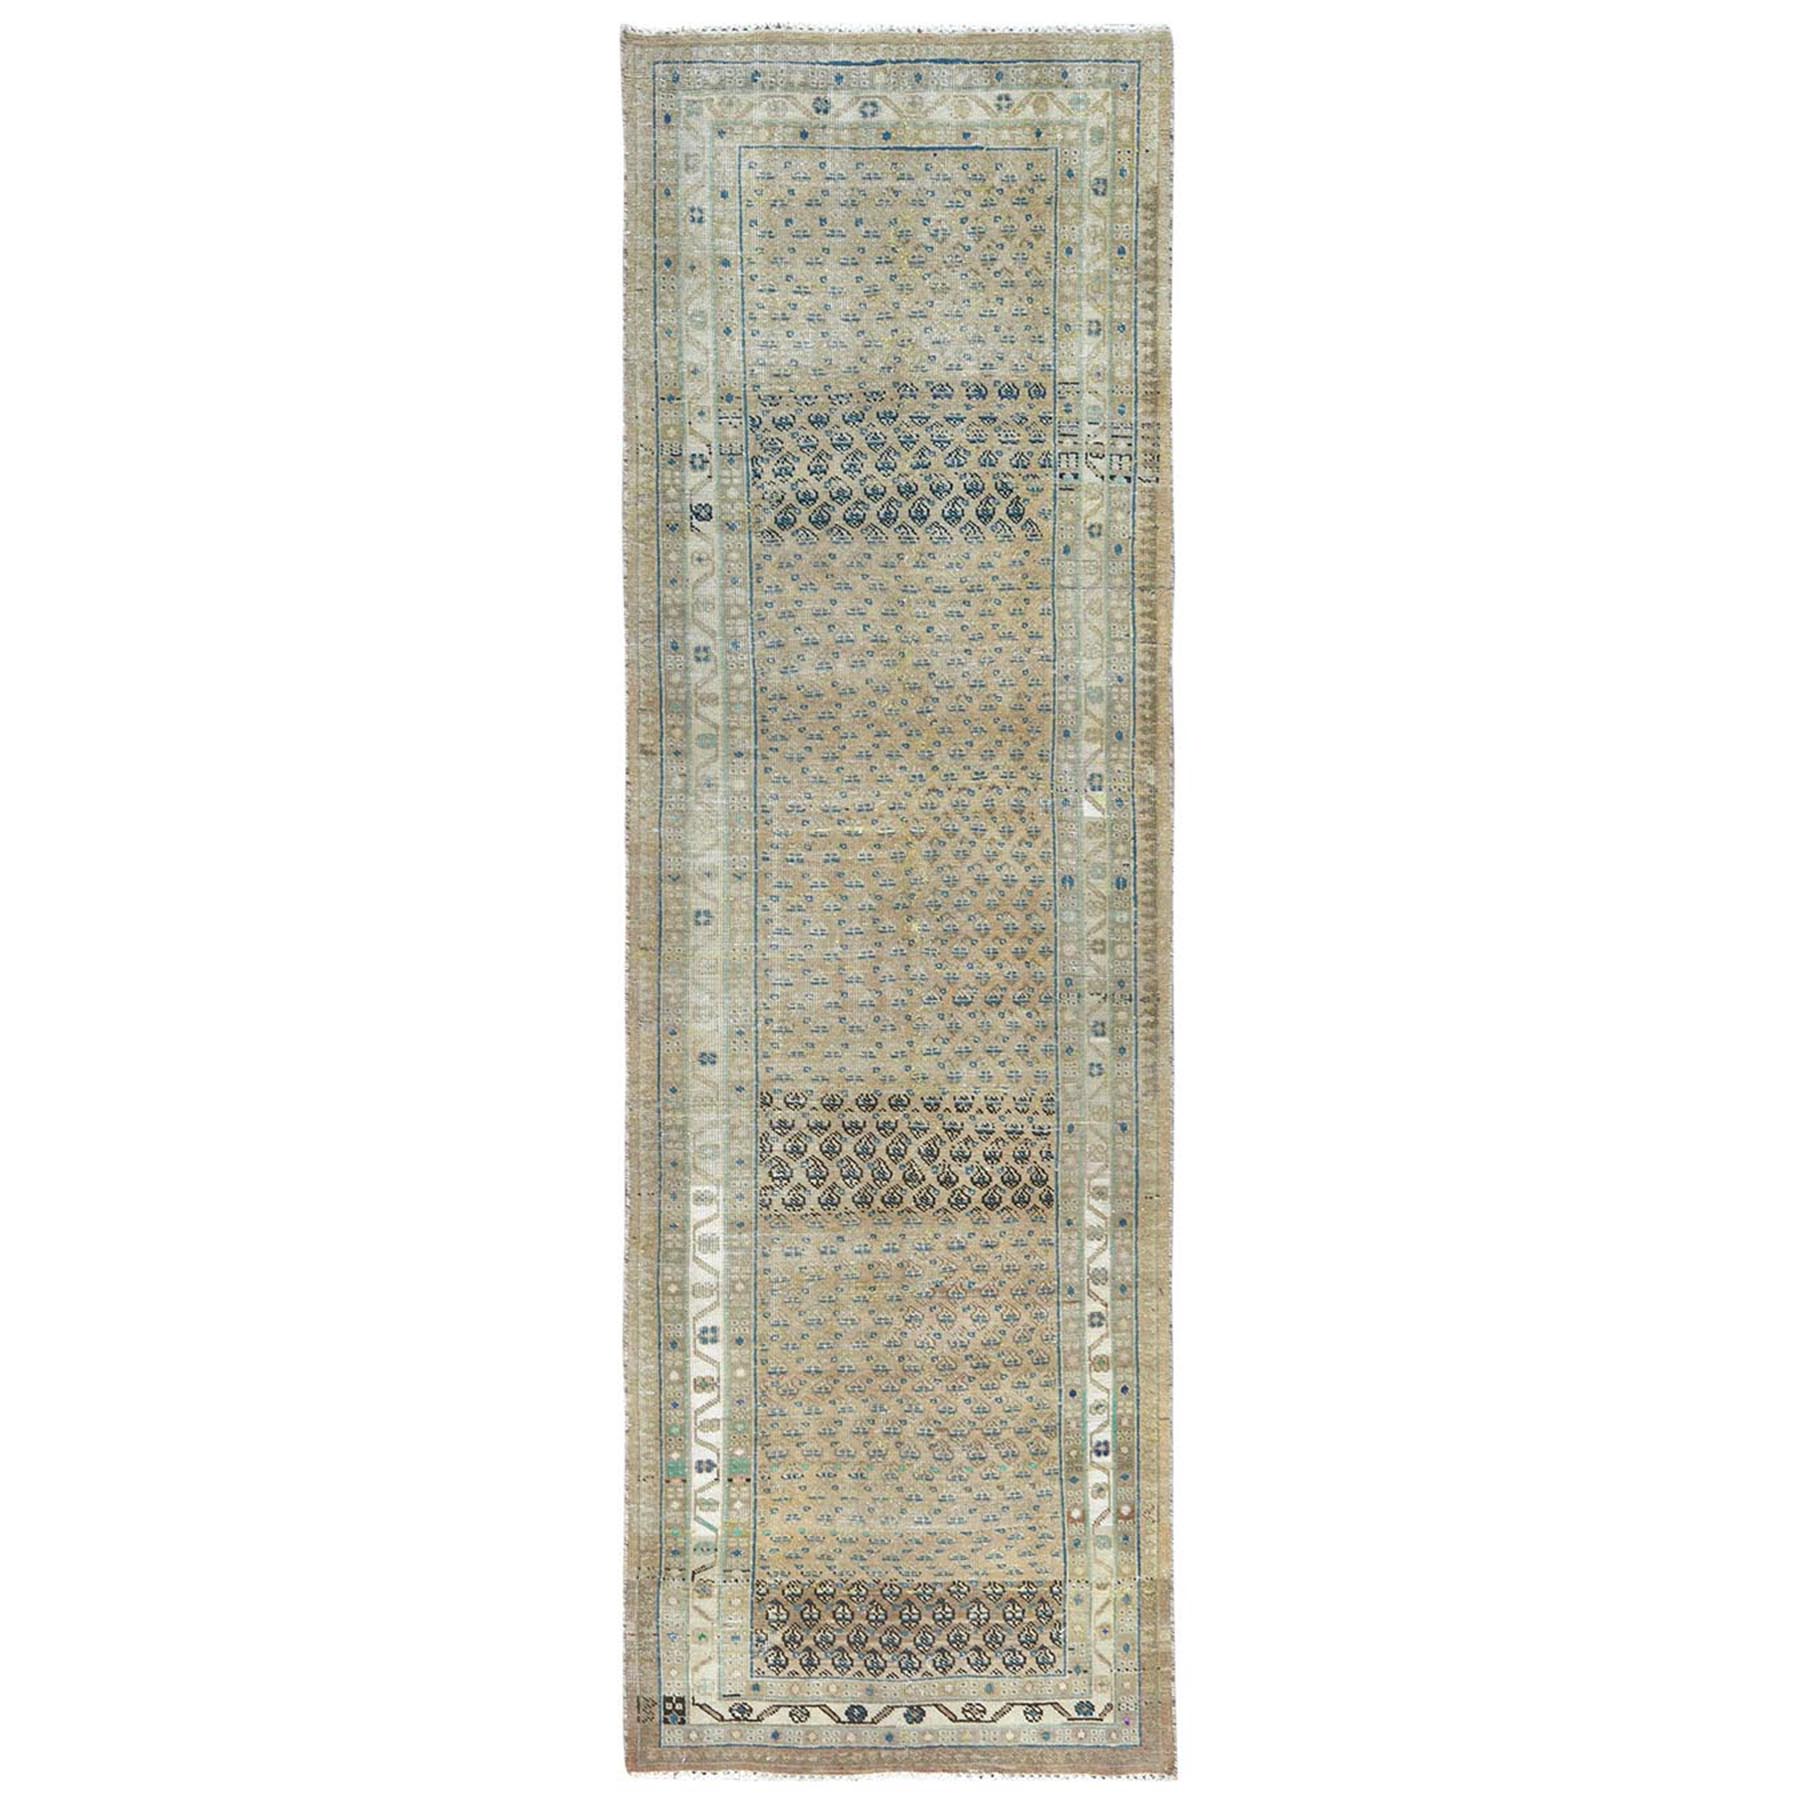 3'8"x11'10" Light Brown, Hand Woven Vintage Persian Serab Repetitive Boteh Design with Multiple Borders, Abrash, Worn Down, Distressed, Pure Wool Wide Runner Oriental Rug 